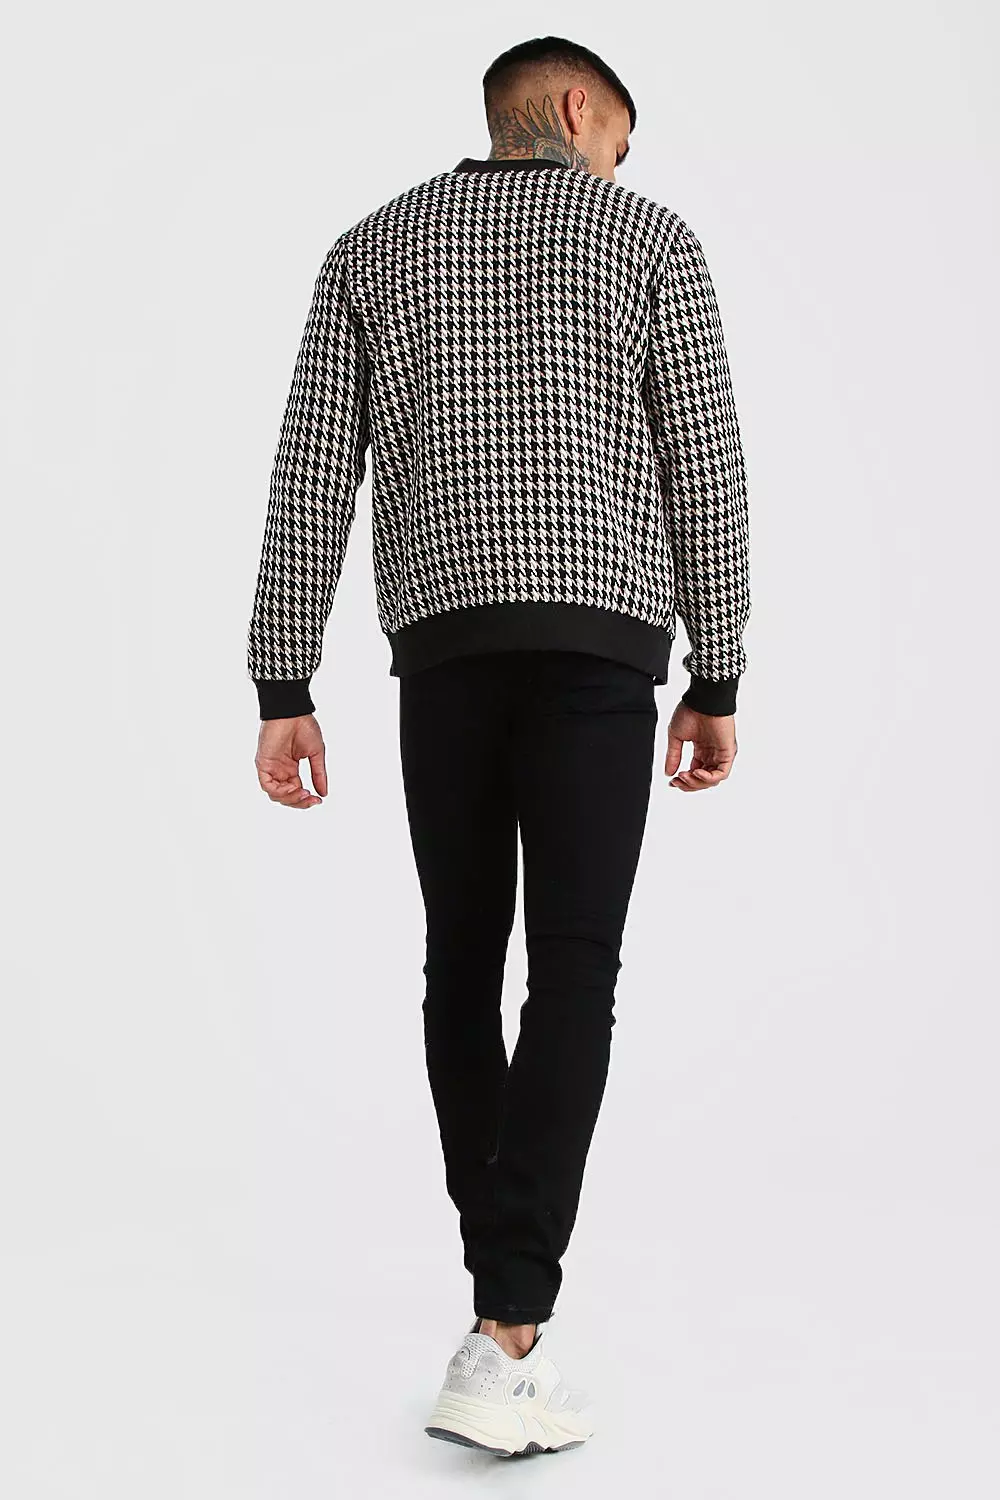 BENMYSHOWER Houndstooth Style Knitted Loose Jacket